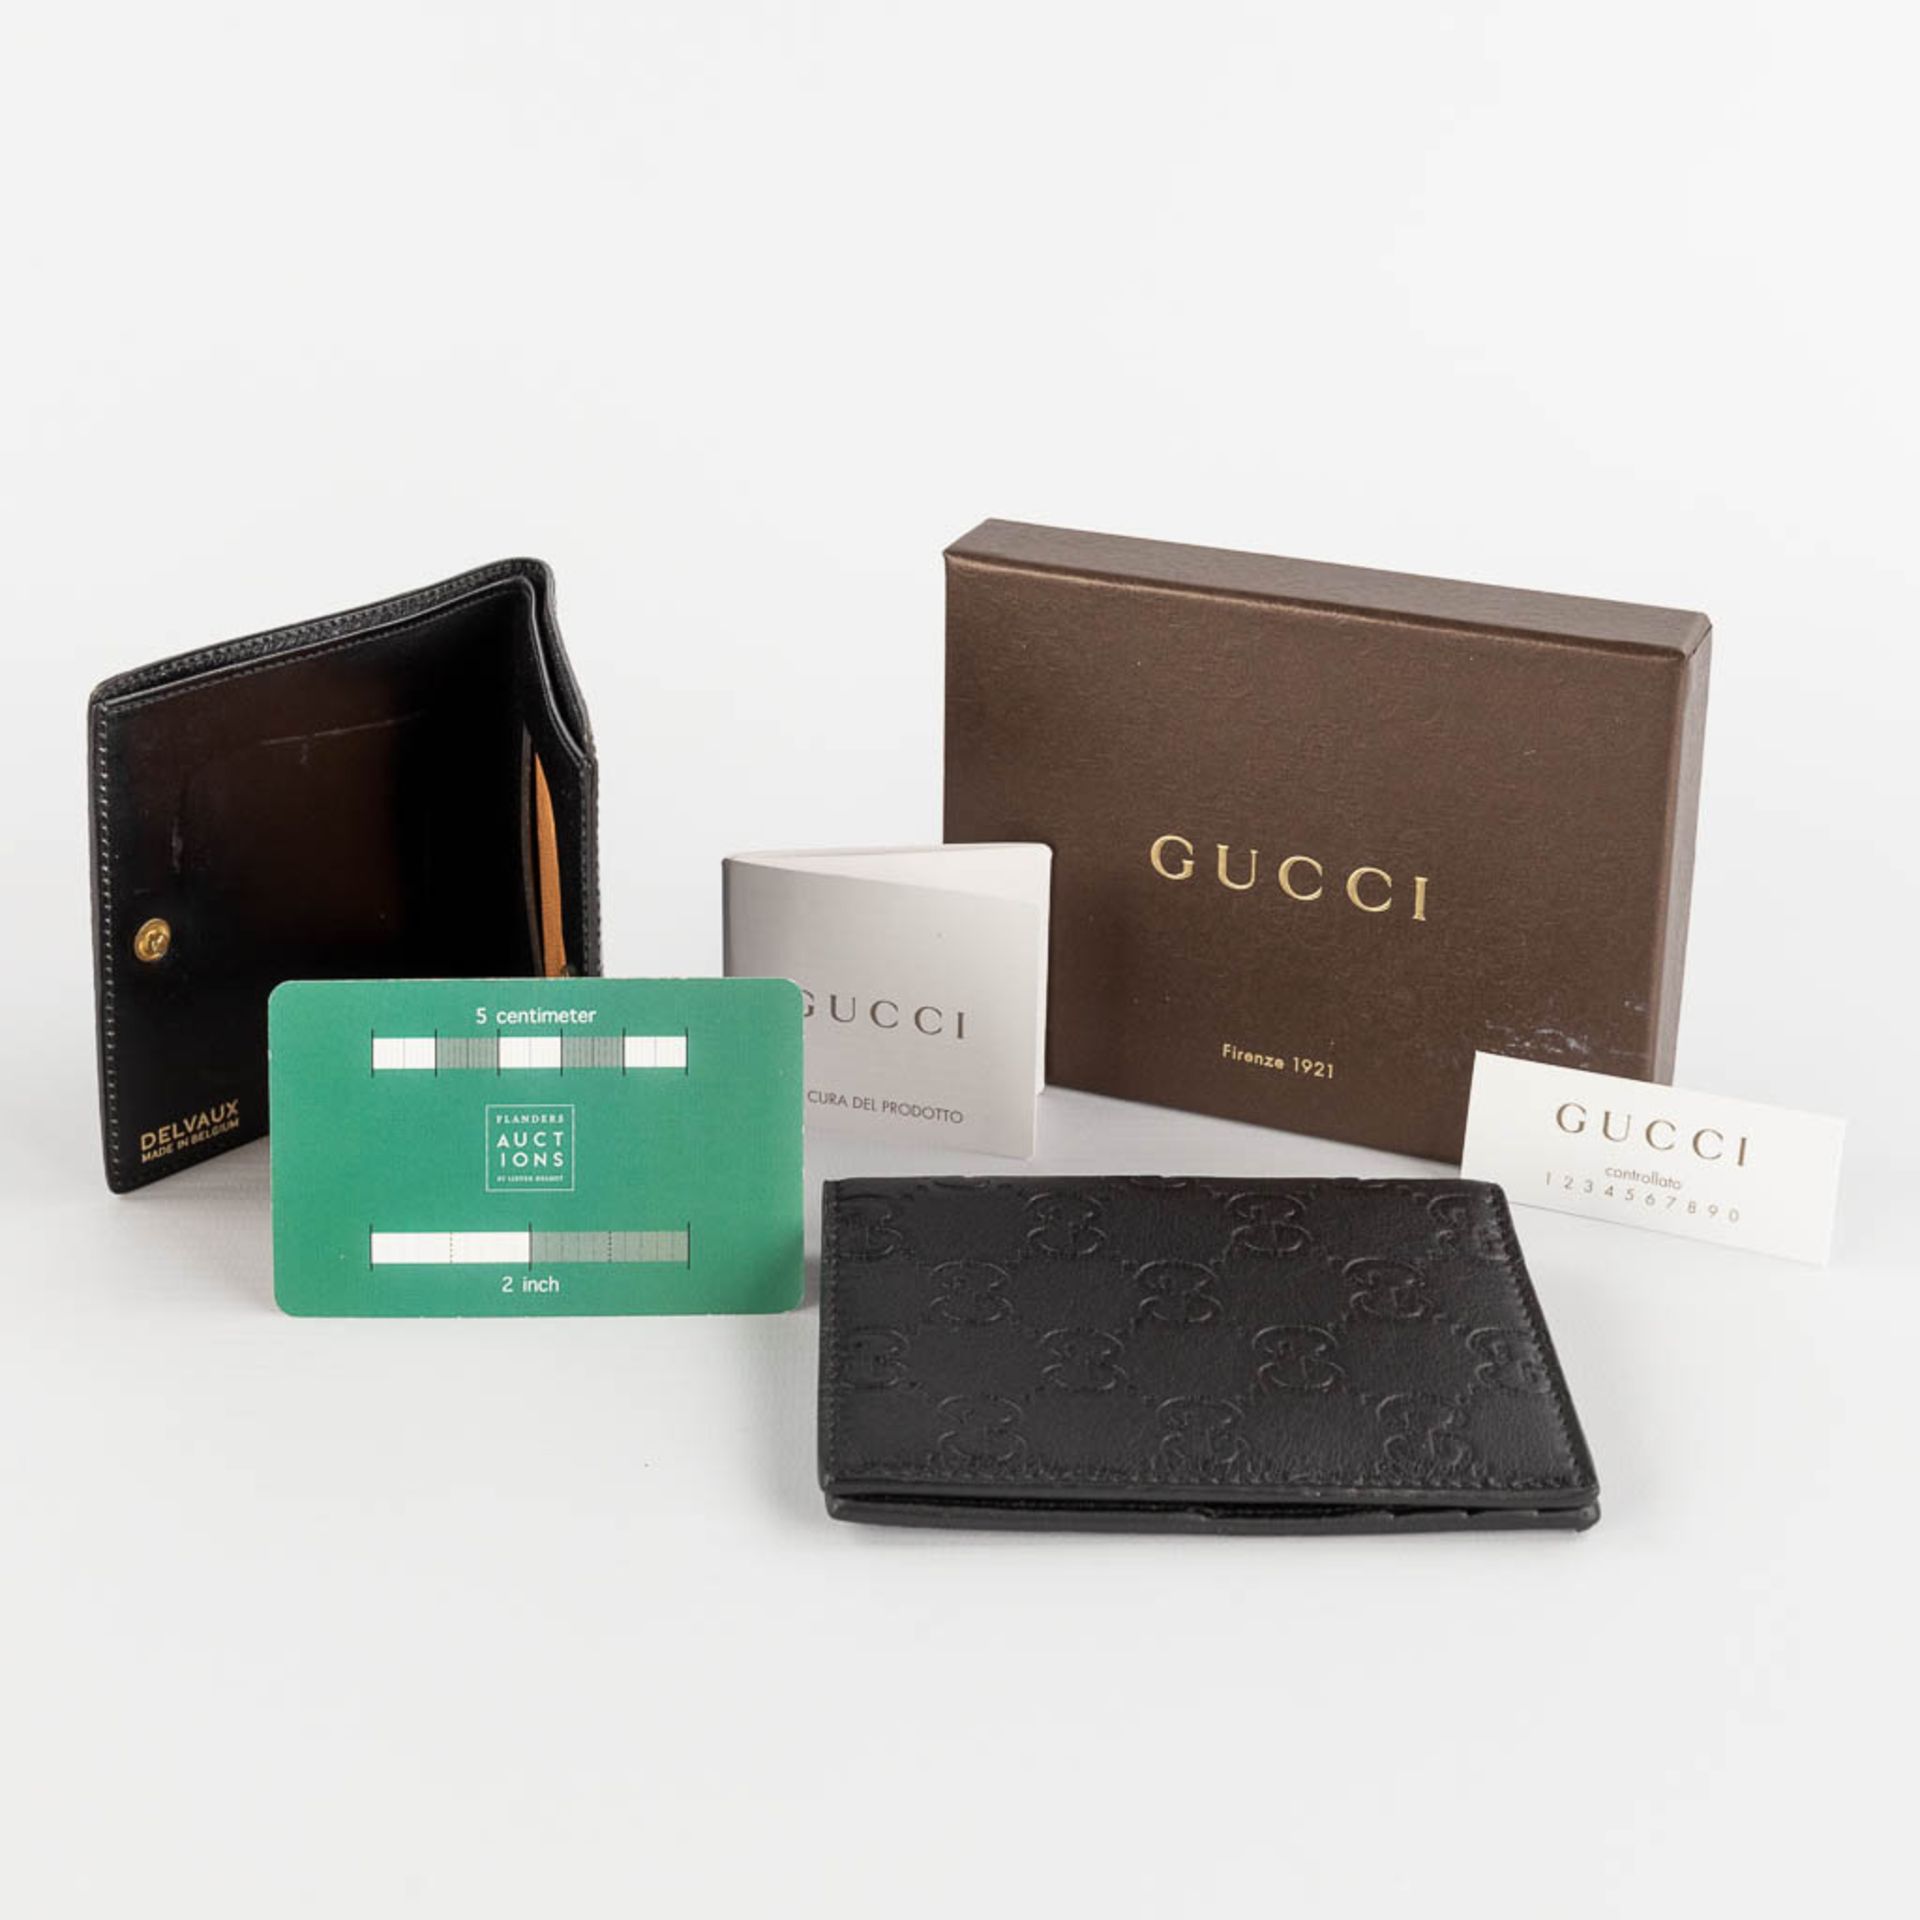 Delvaux & Gucci, a bank note and cardholder, Crocodile and calf leather. (W:10 x H:9,5 cm) - Bild 2 aus 17